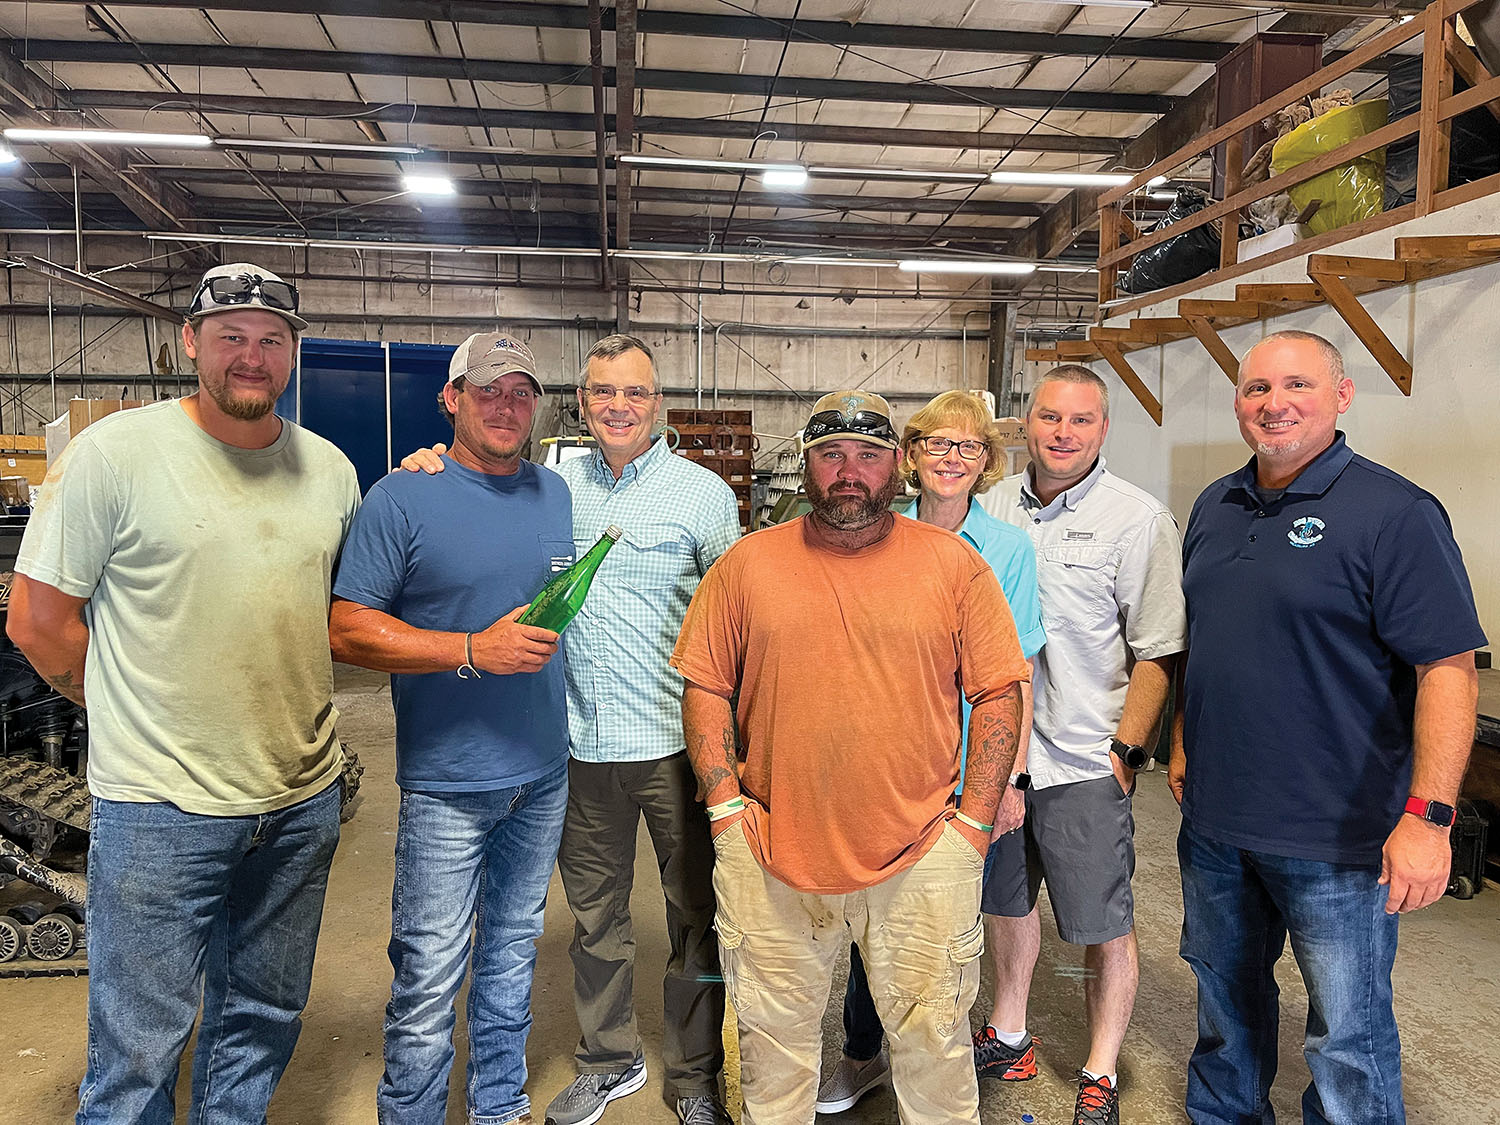 Dahl family members visit with Big River Shipbuilders team members; from left are: Turner Williams, Billy Mitchell, Eric Dahl, T.J. Smith, Melanie Dahl, Chris Dahl and Brad Babb. (Photo courtesy of Eric Dahl)